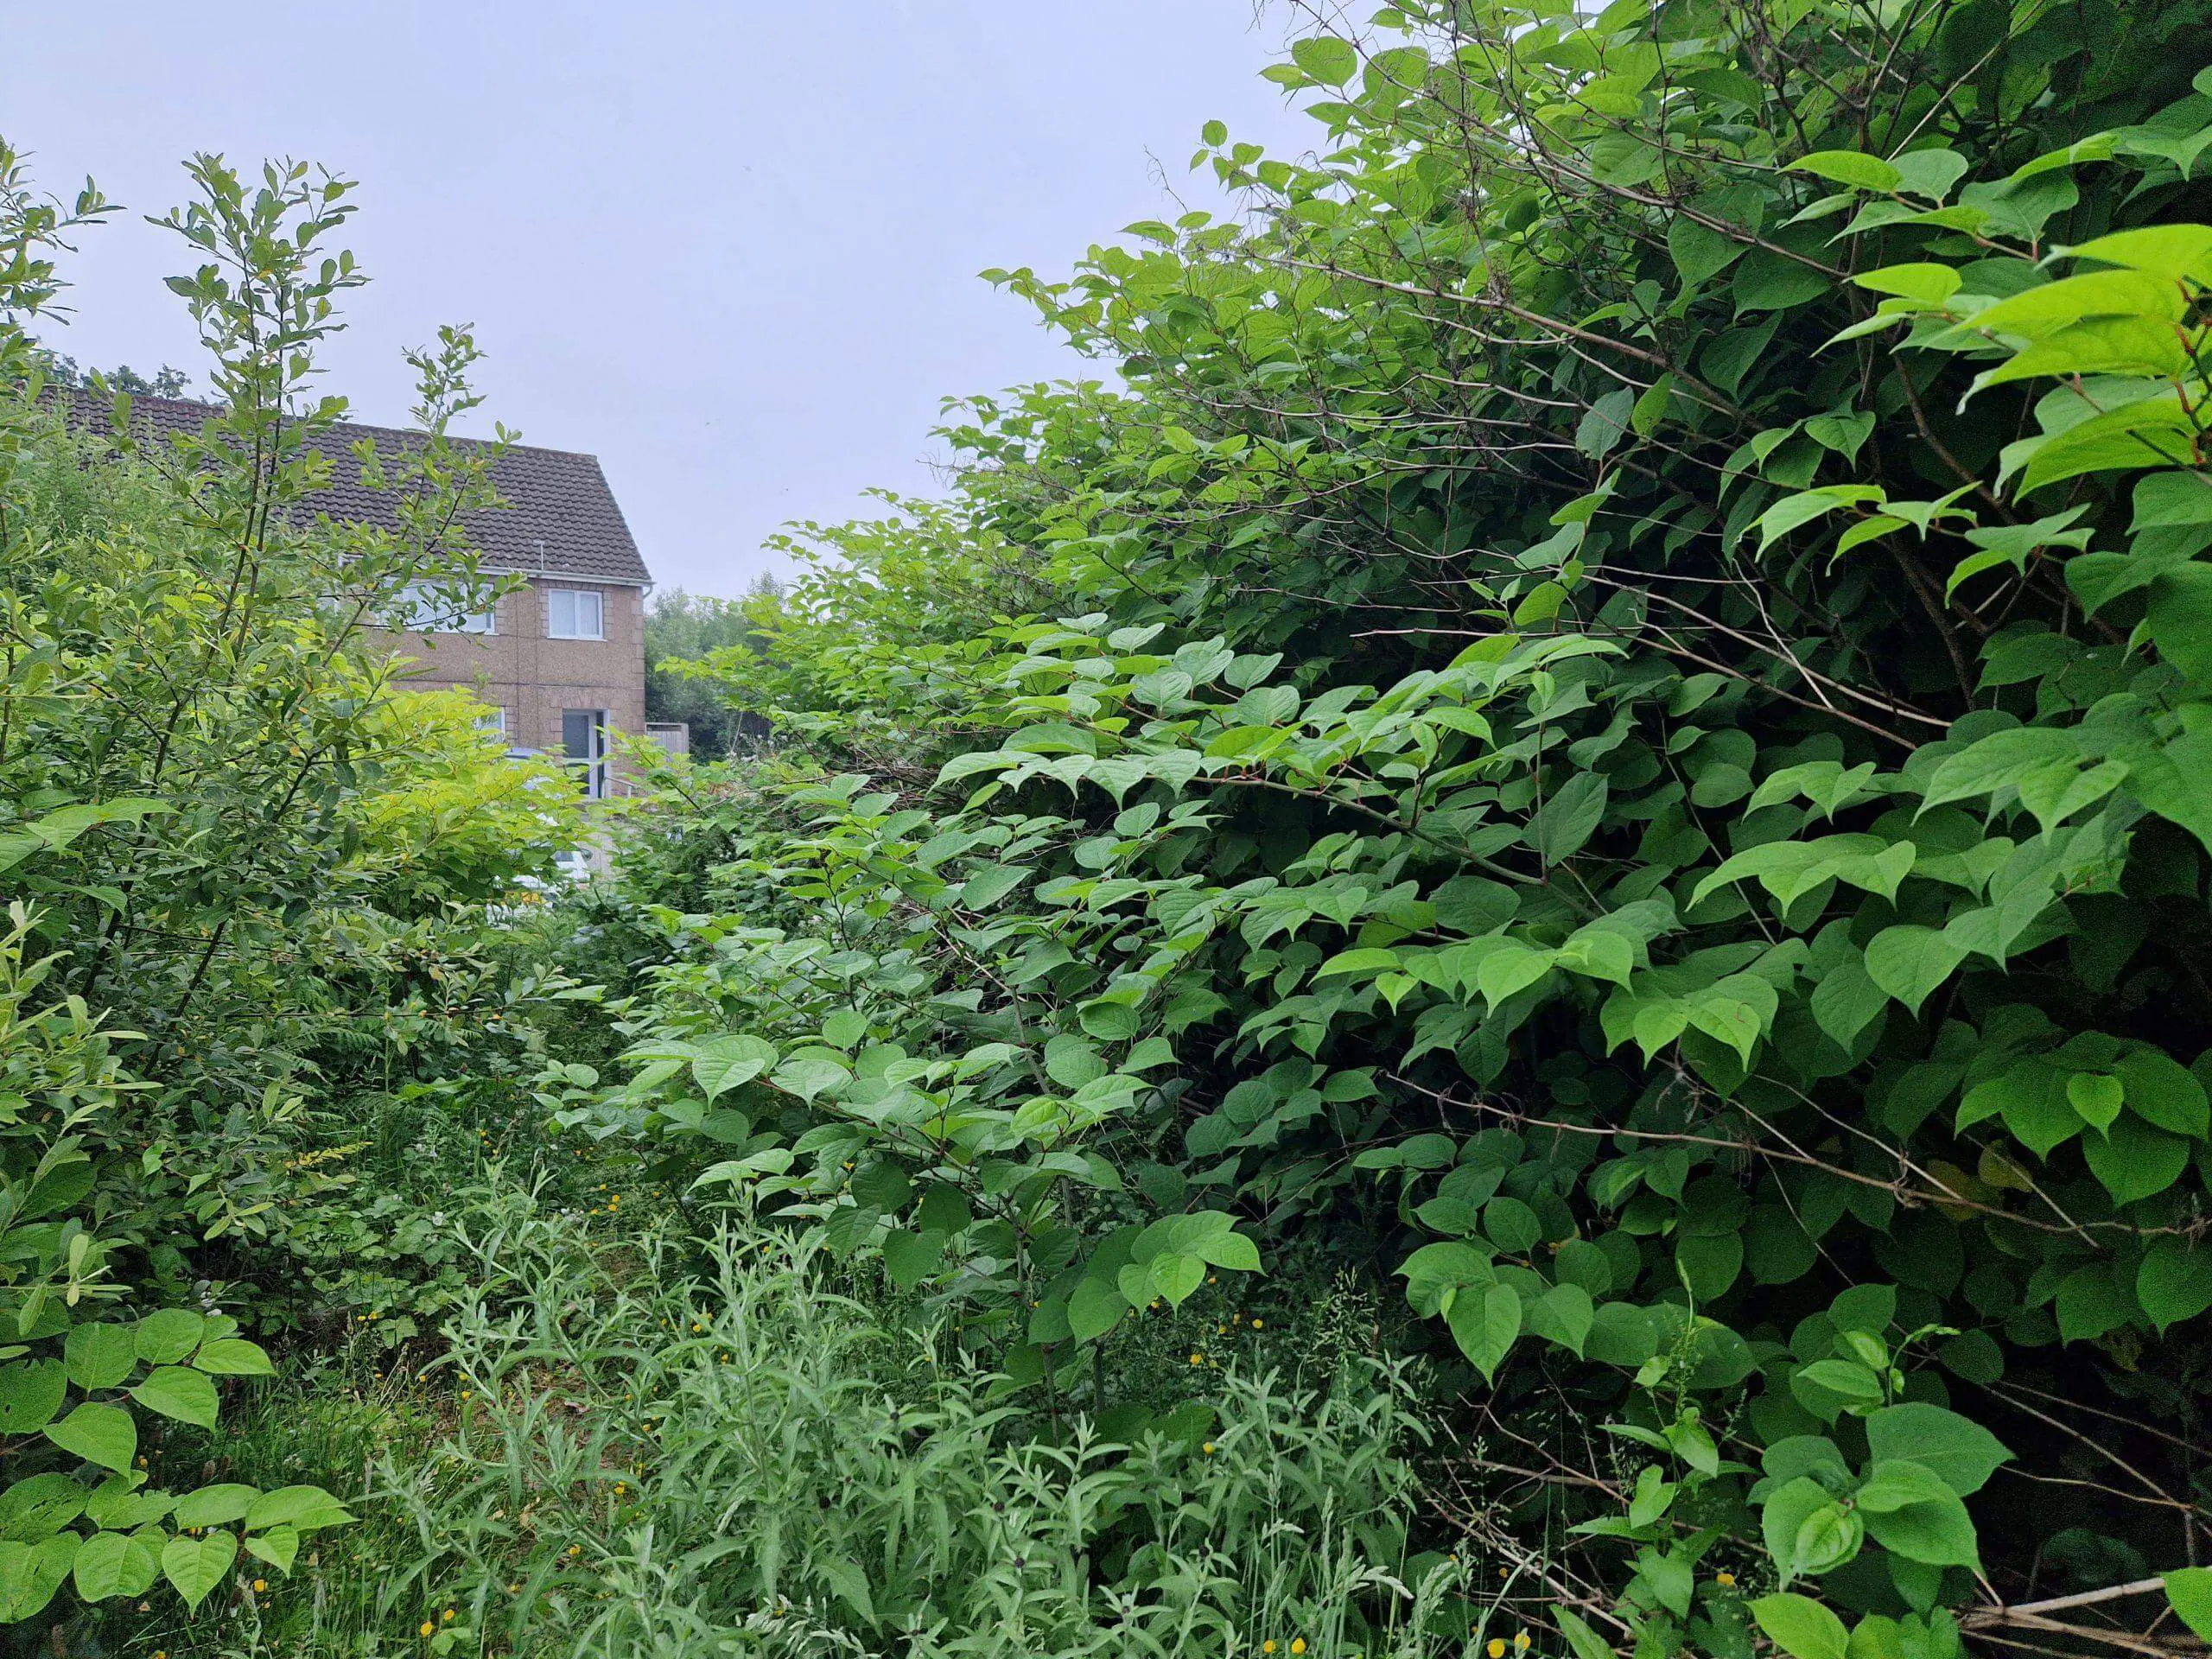 Japanese knotweed growing too close to properties which can affect both their value and structure